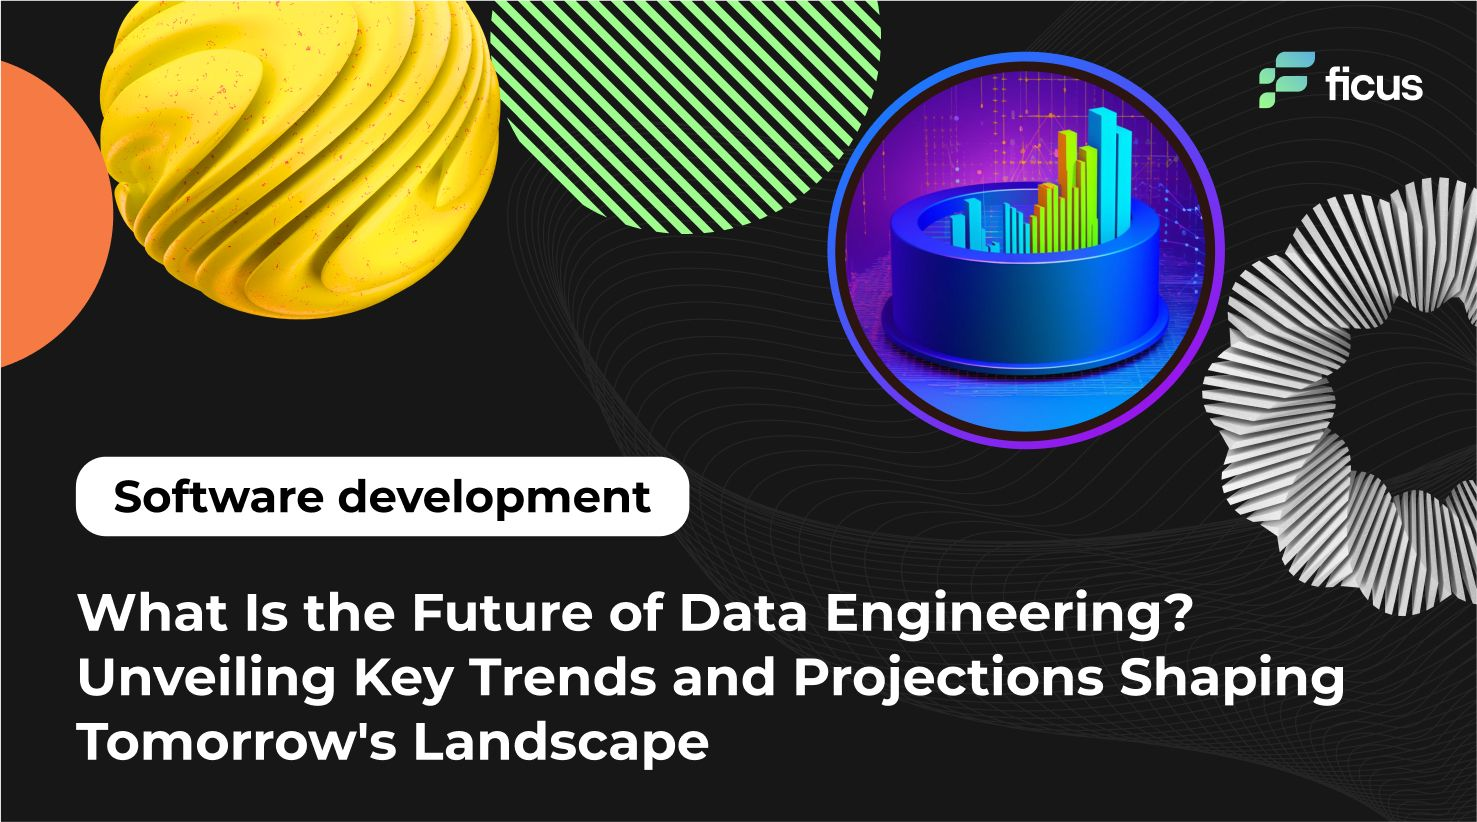 What Is the Future of Data Engineering_ Unveiling Key Trends and Projections Shaping Tomorrow_s Landscape